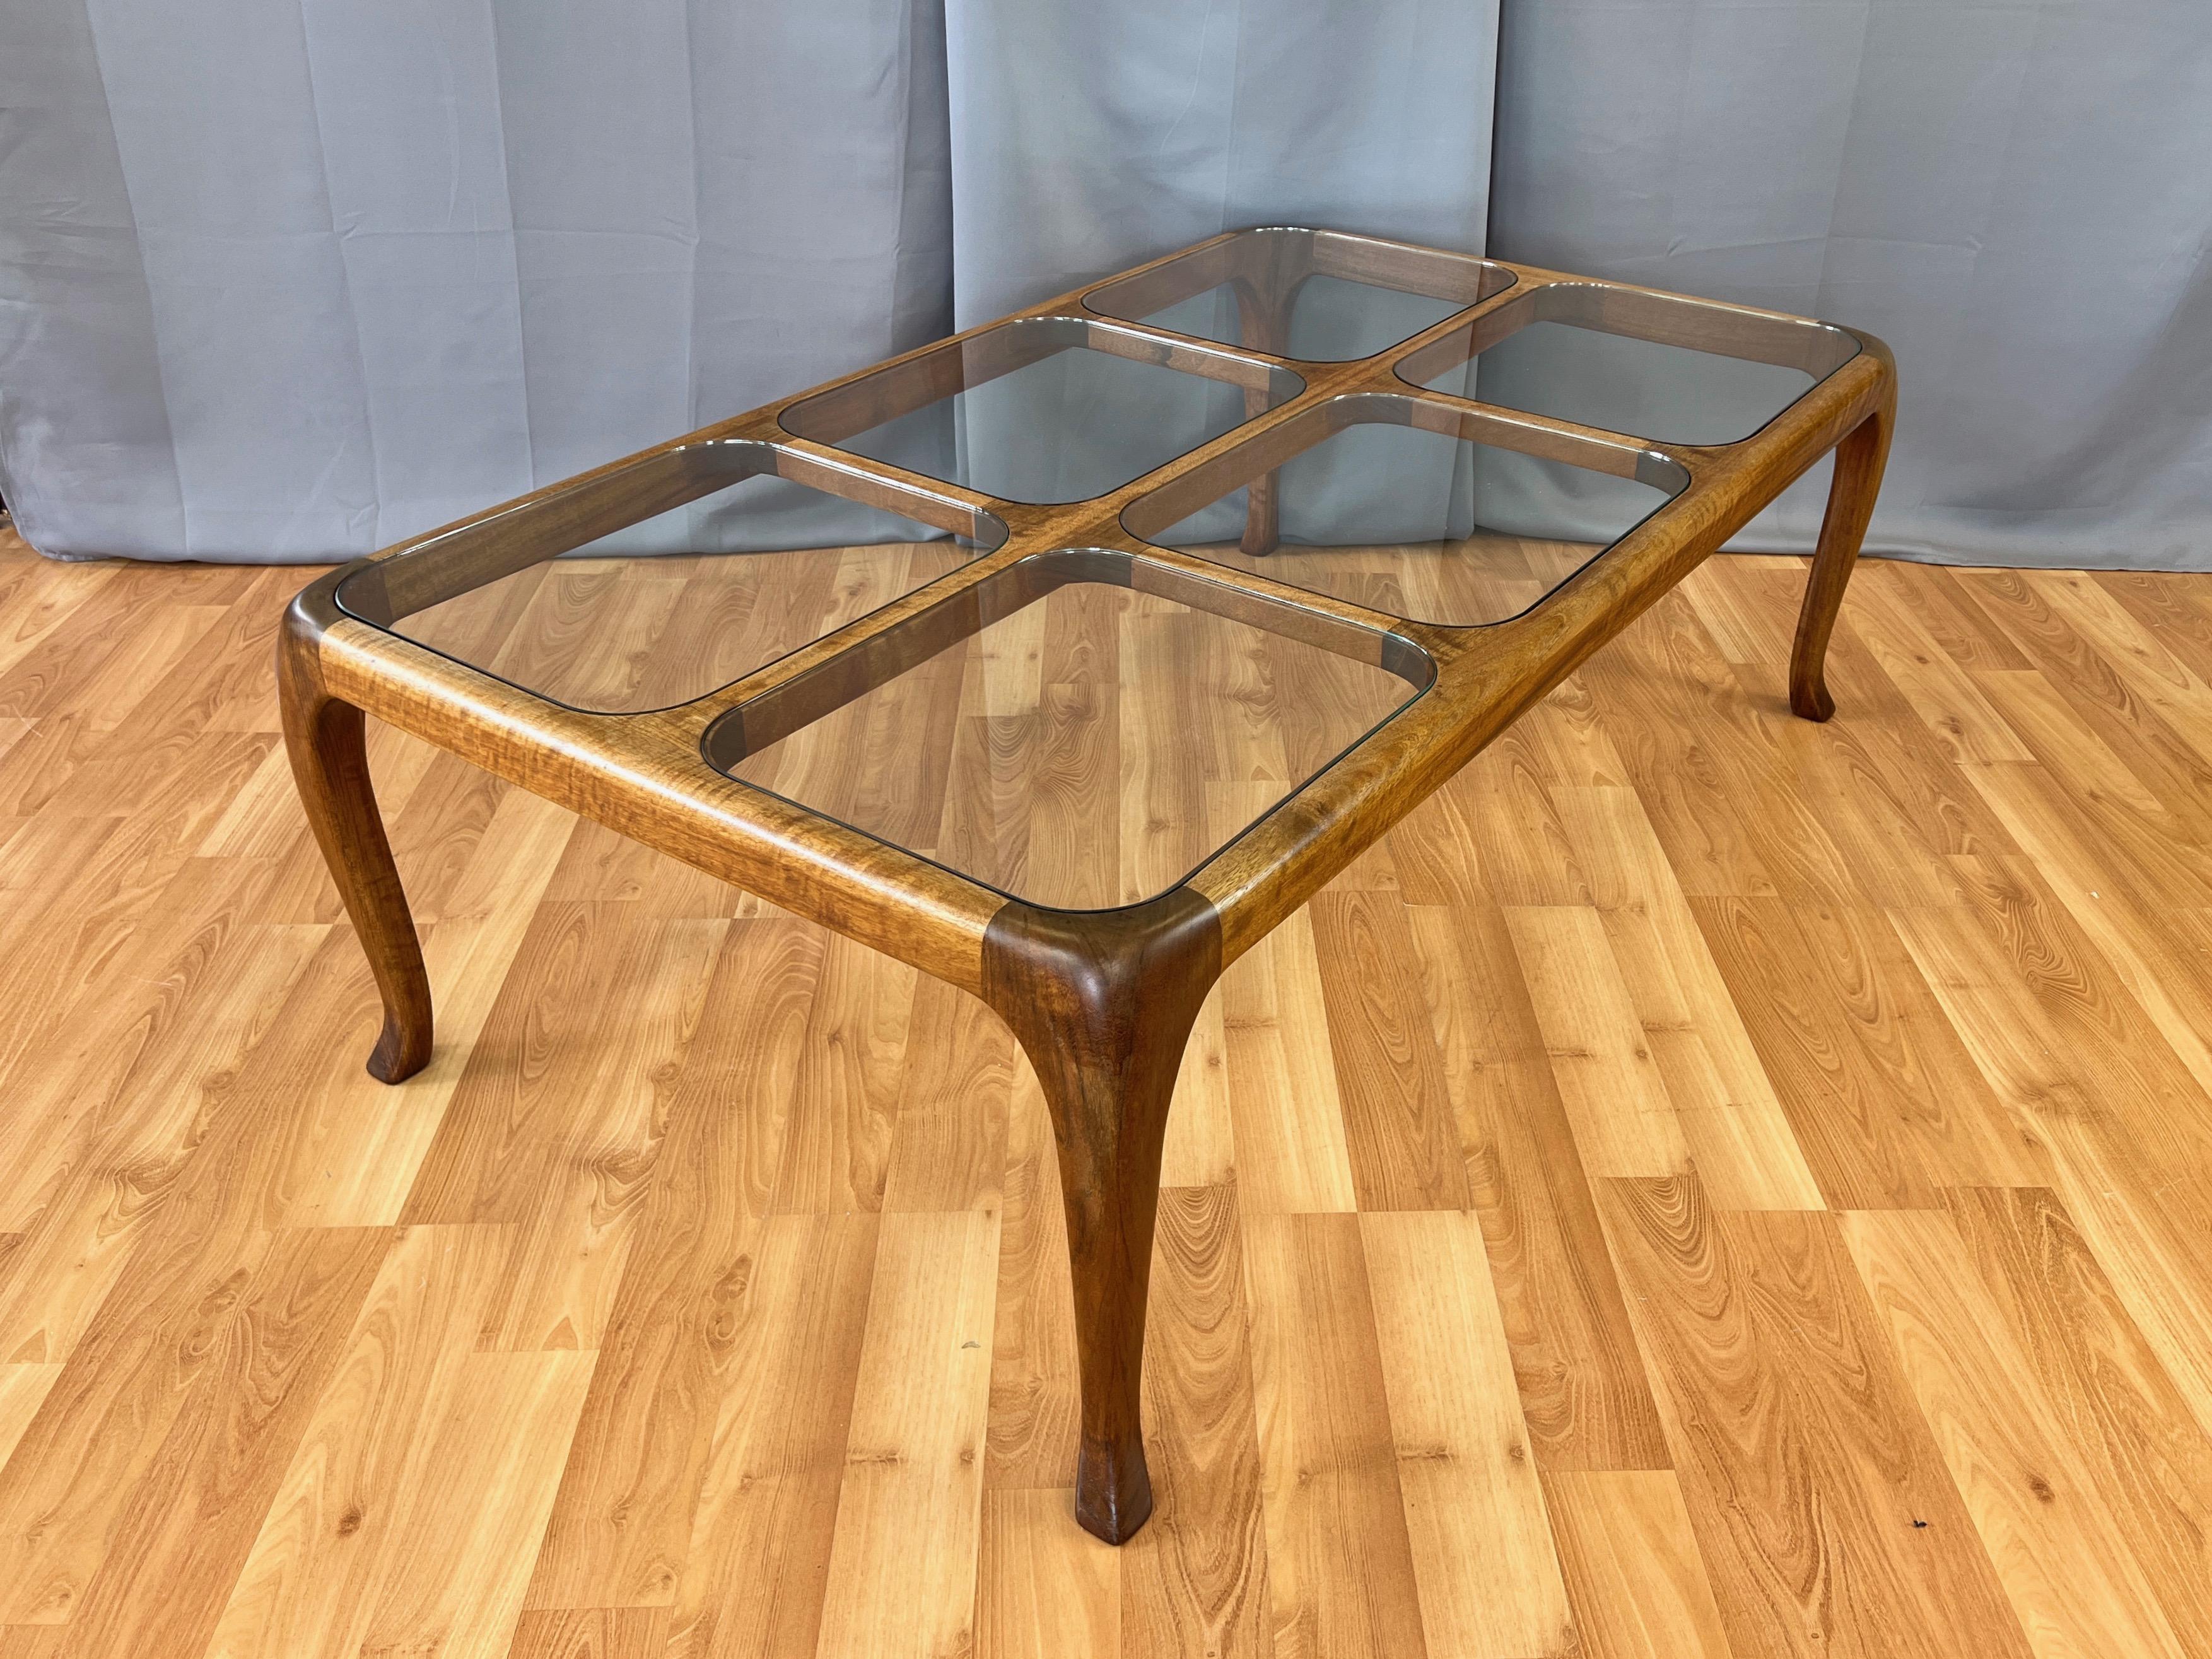 Thomas Saydah Large Walnut and Glass Coffee Table, Signed and Dated, 1982 For Sale 10